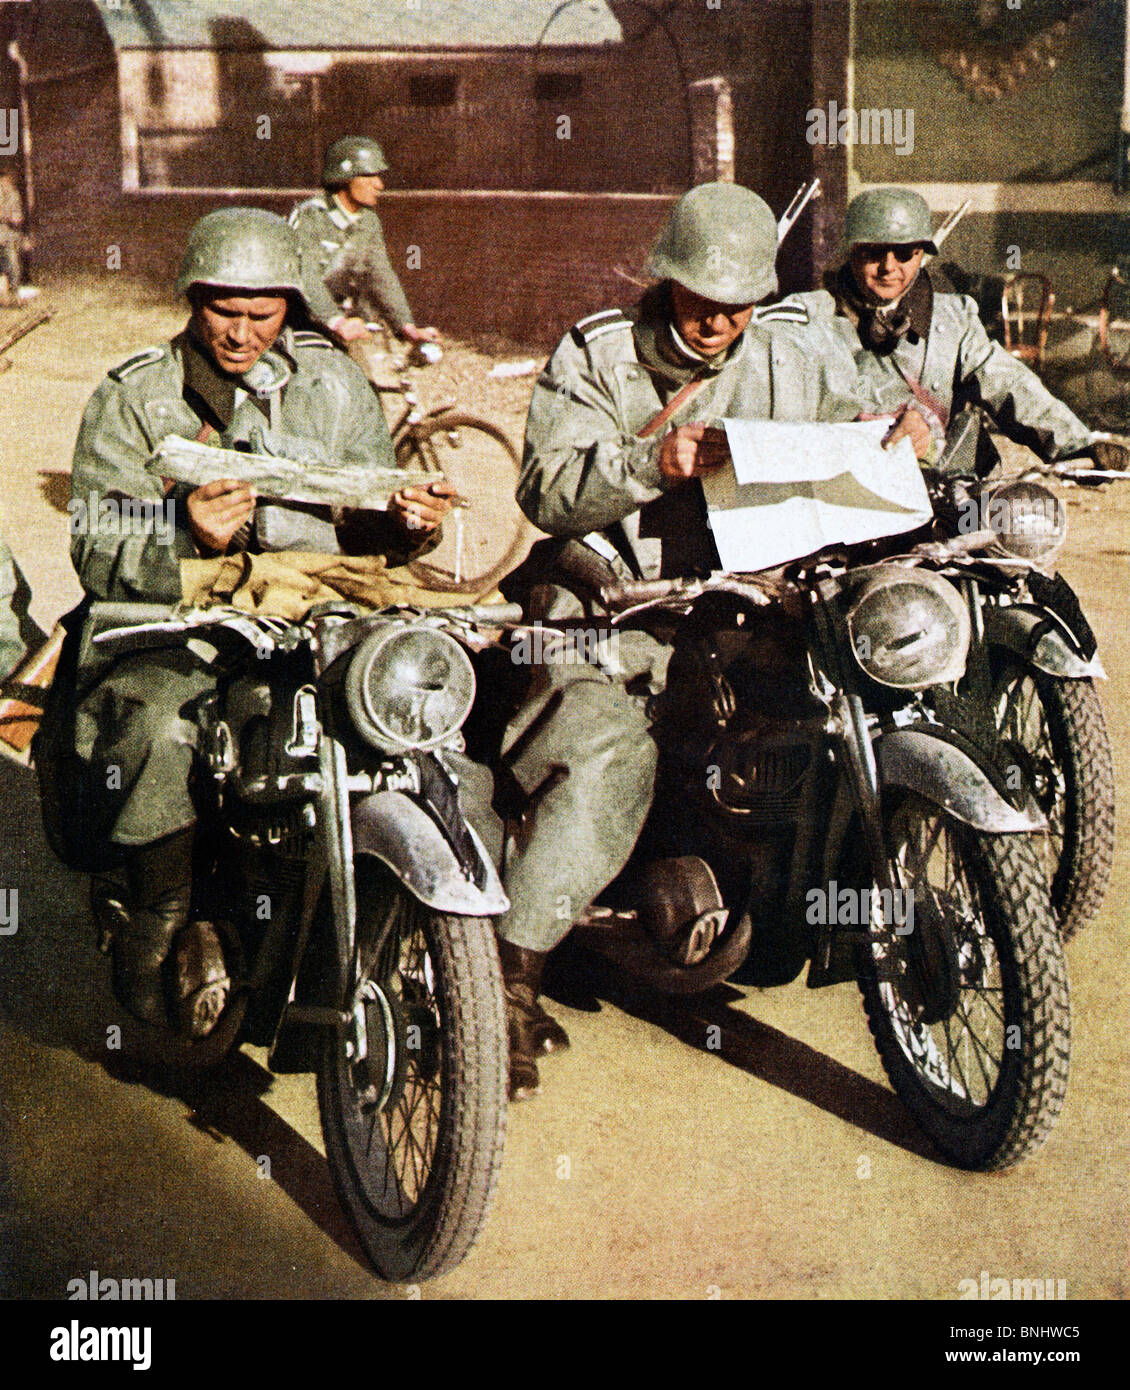 World War II German troops motorcycle study road maps Invasion of France June 1940 Second World War WW2 war military army Stock Photo